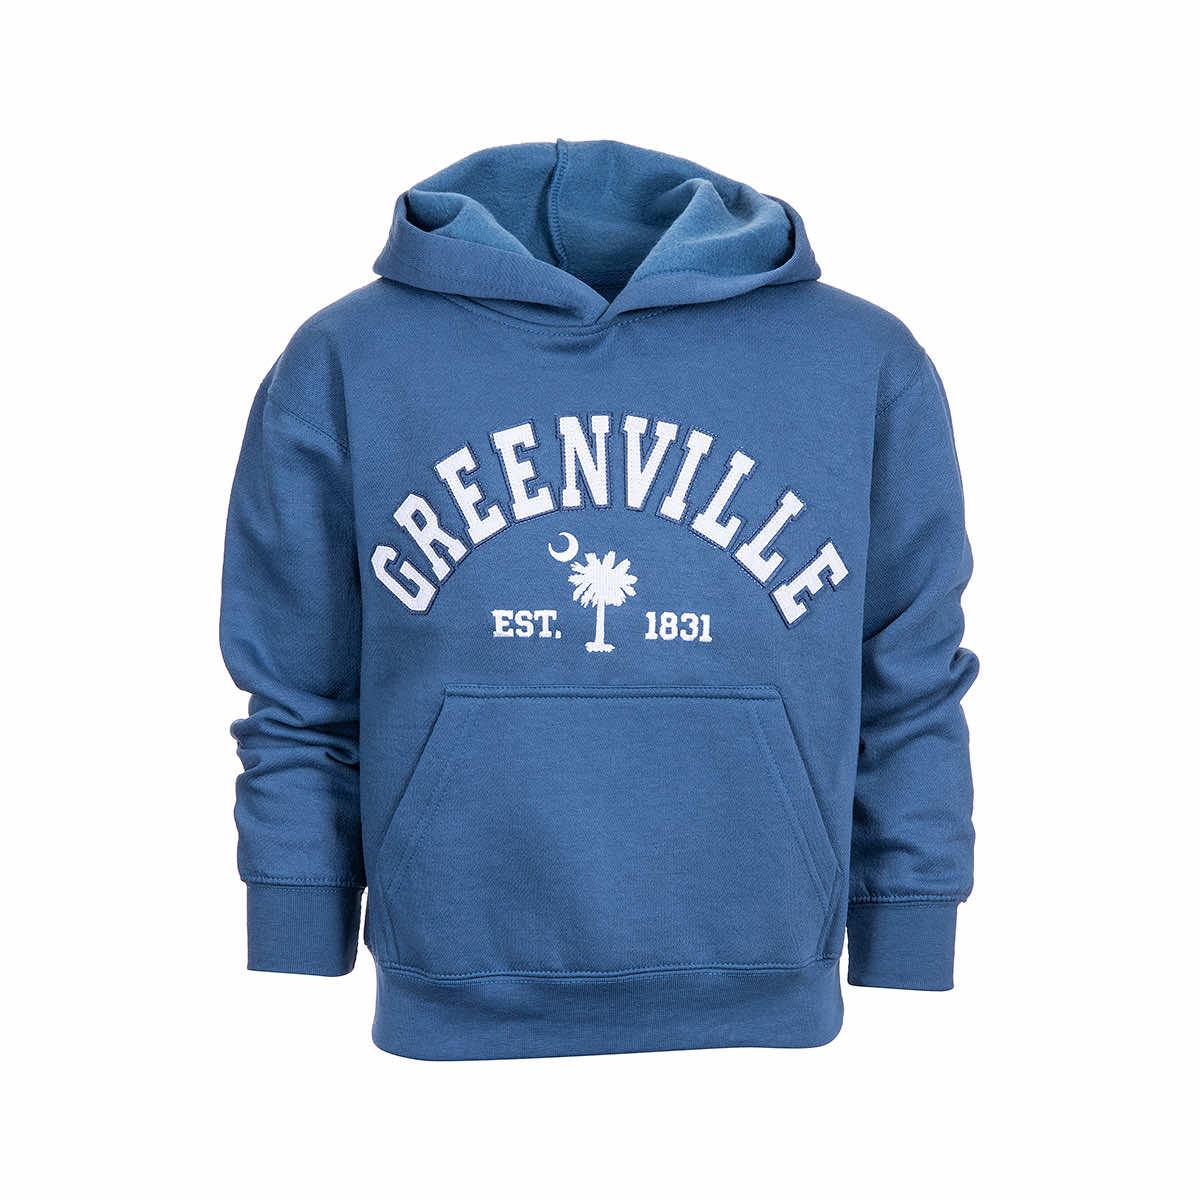  Kids ' Greenville Palm Tree Icon Applique Hoodie